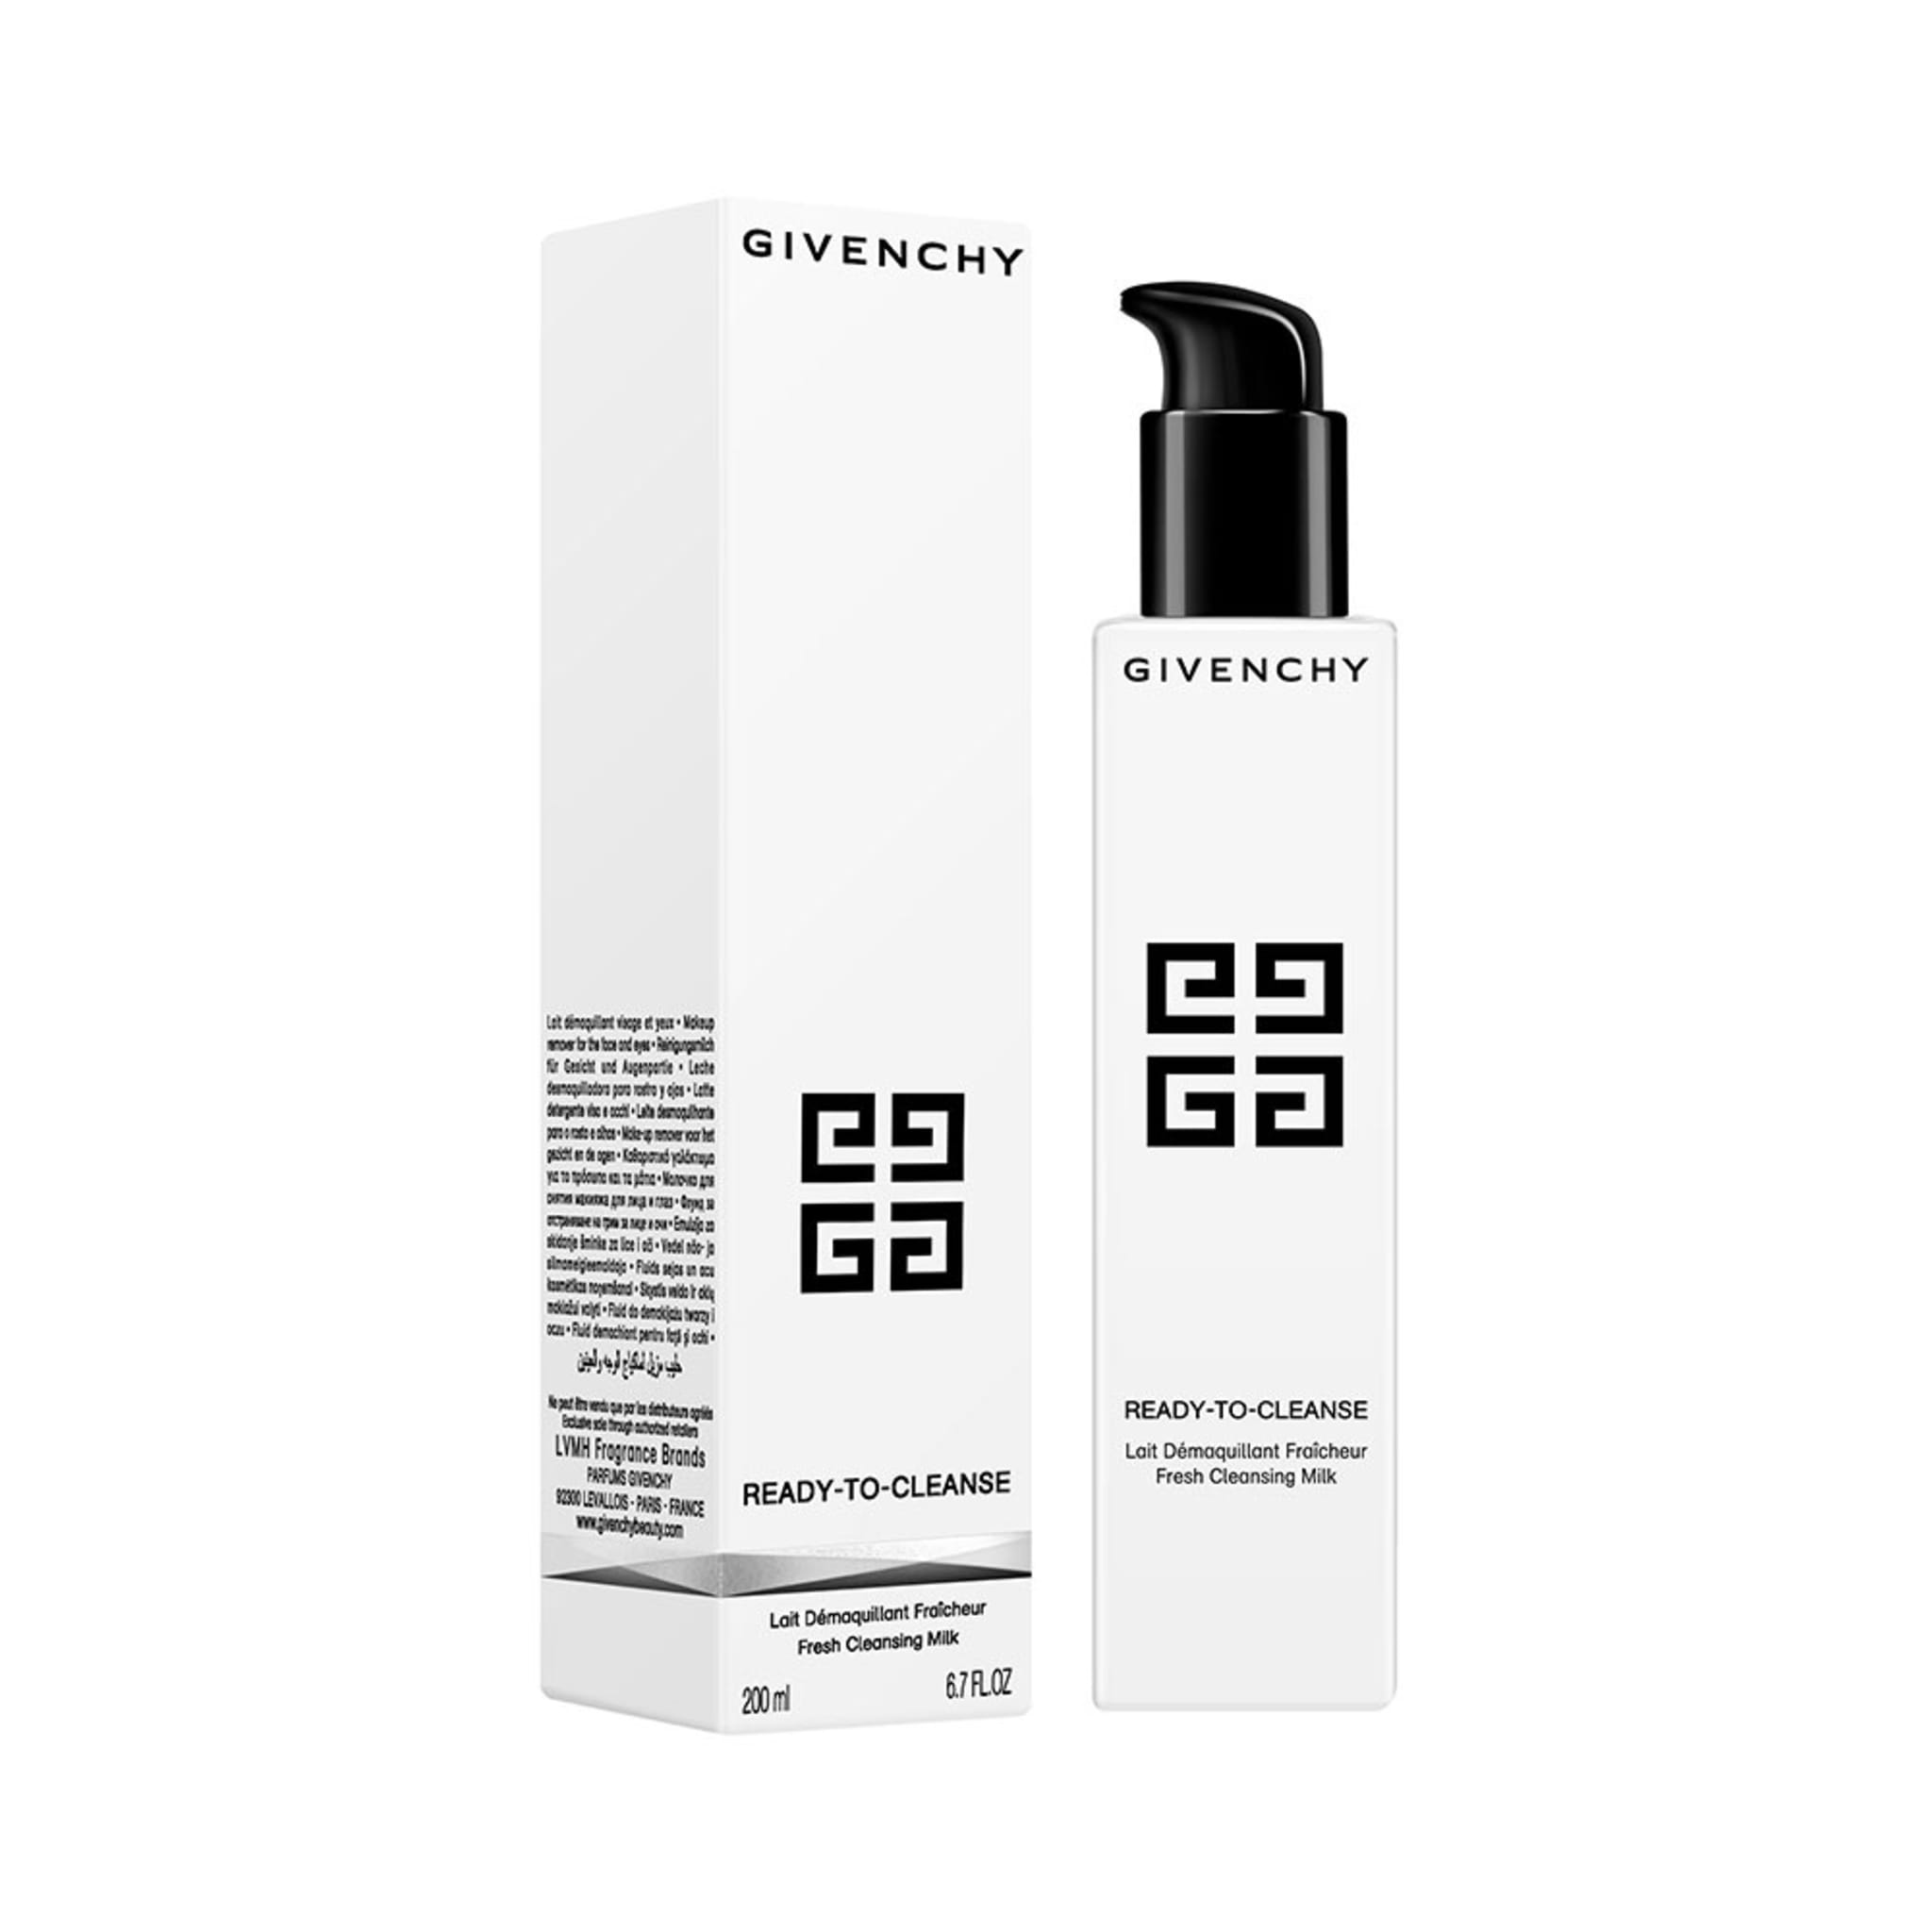 Ready-To-Cleanse Fresh Cleansing Milk, 30 ML